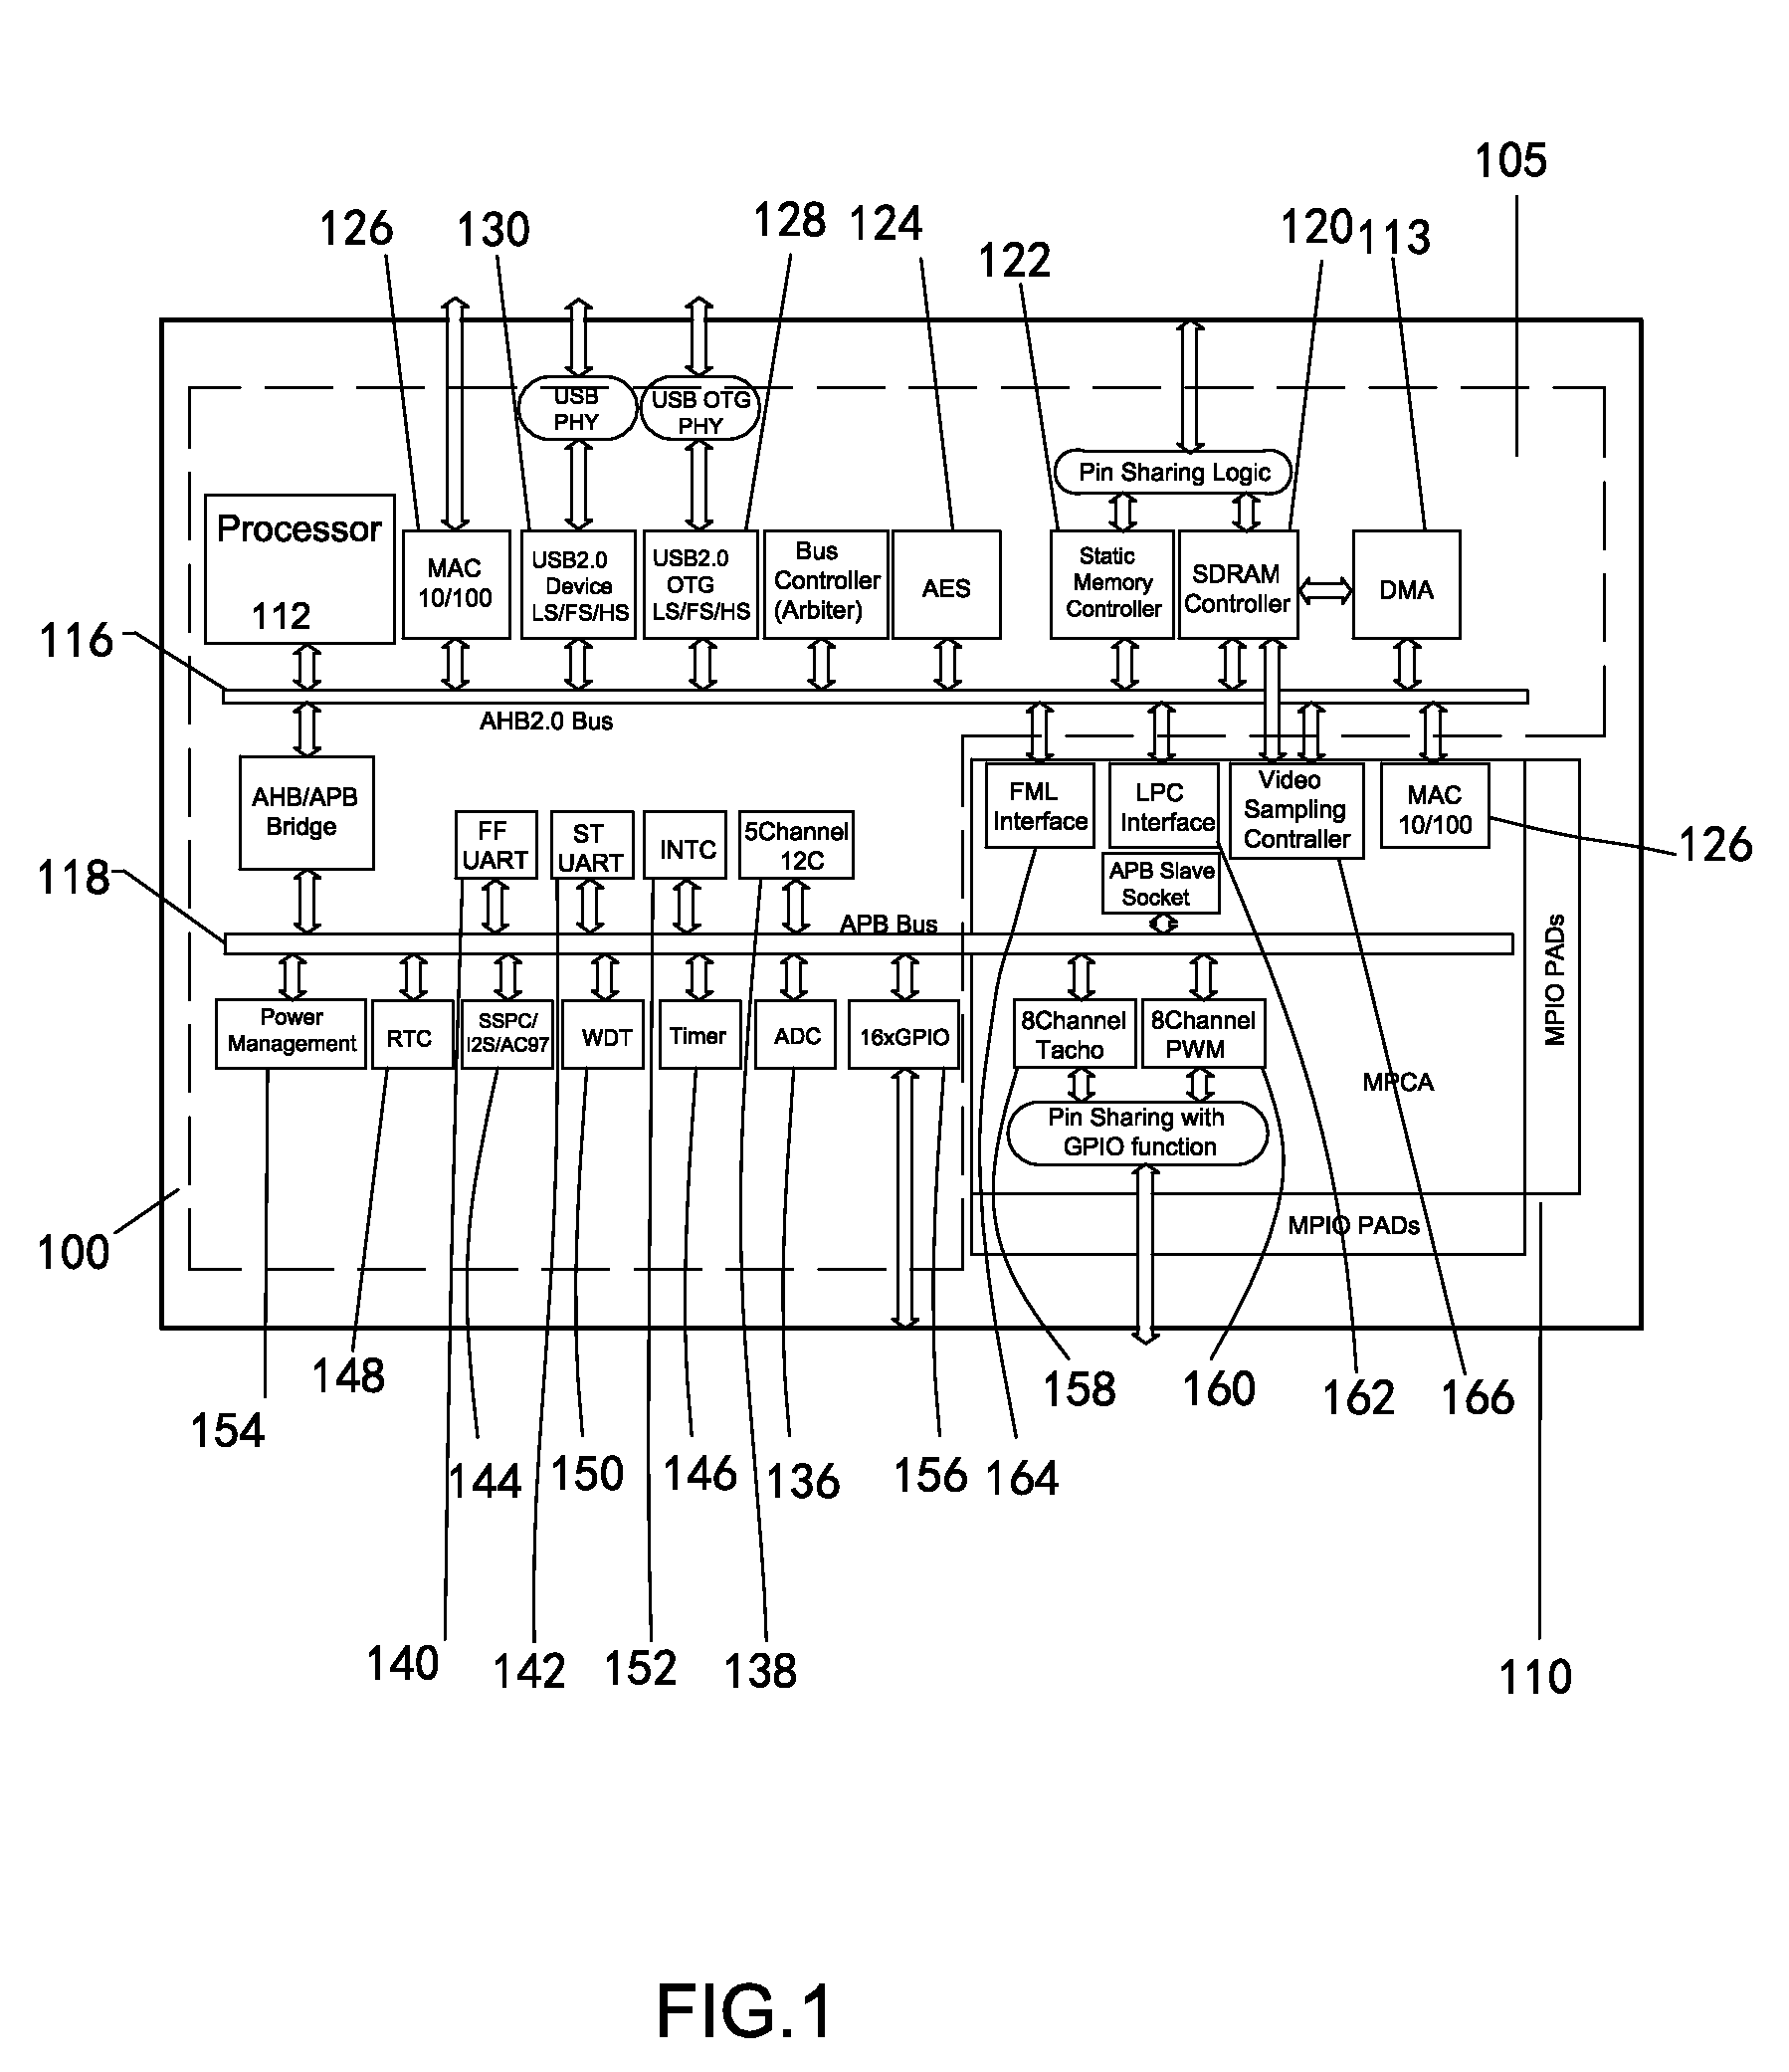 Architecture and method for remote platform control management